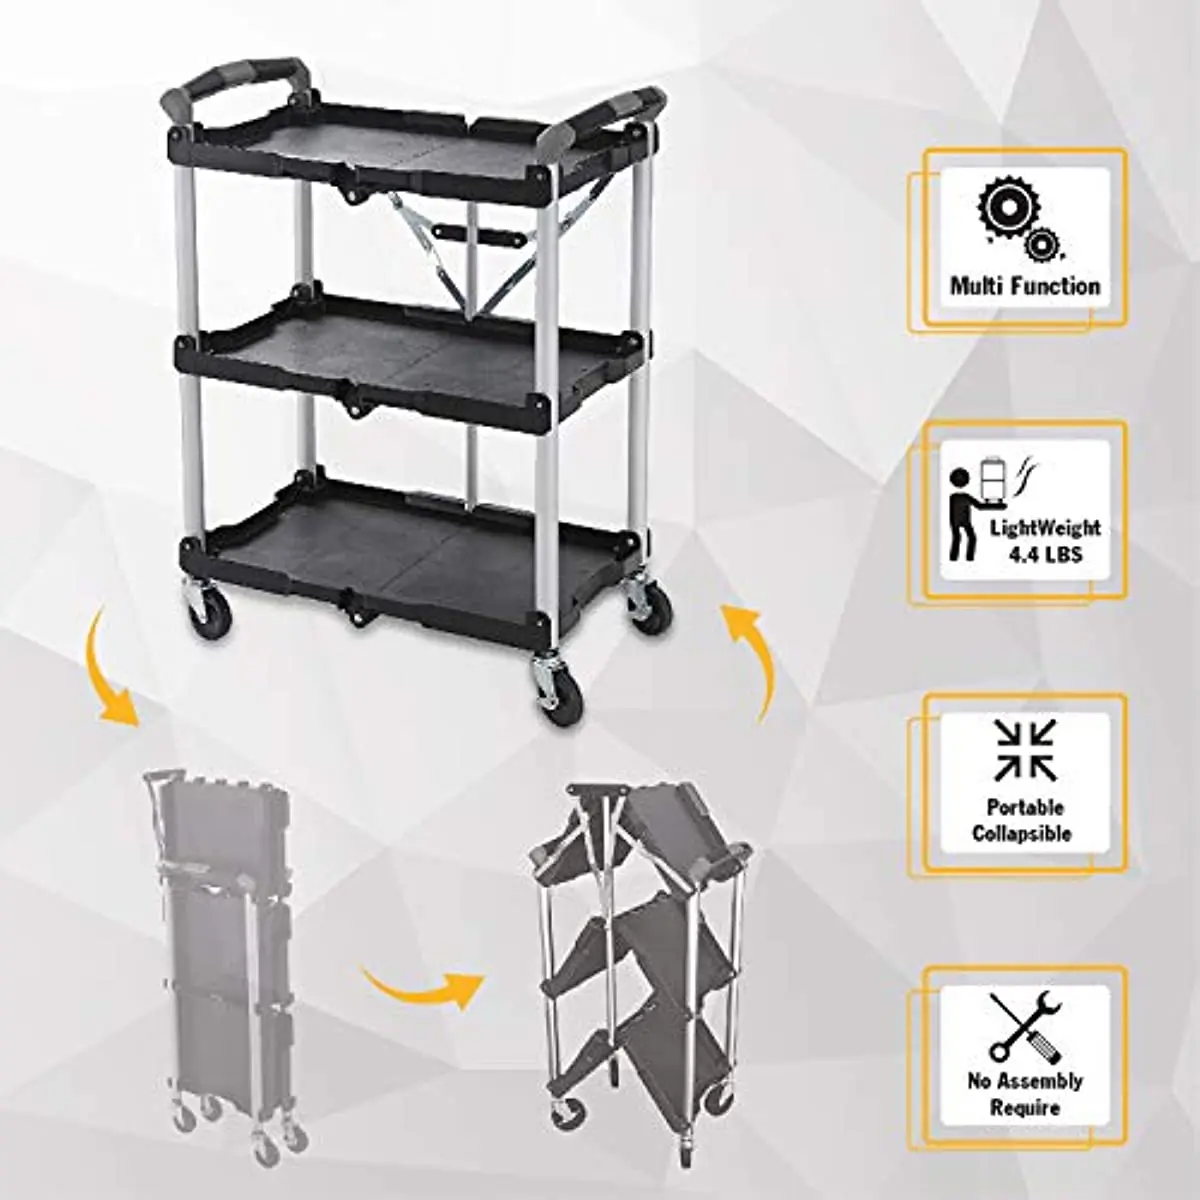 Olympia Tools 85-188 Pack-N-Roll Folding Collapsible Service Cart, Black, 50 Lb. Load Capacity per Shelf images - 6